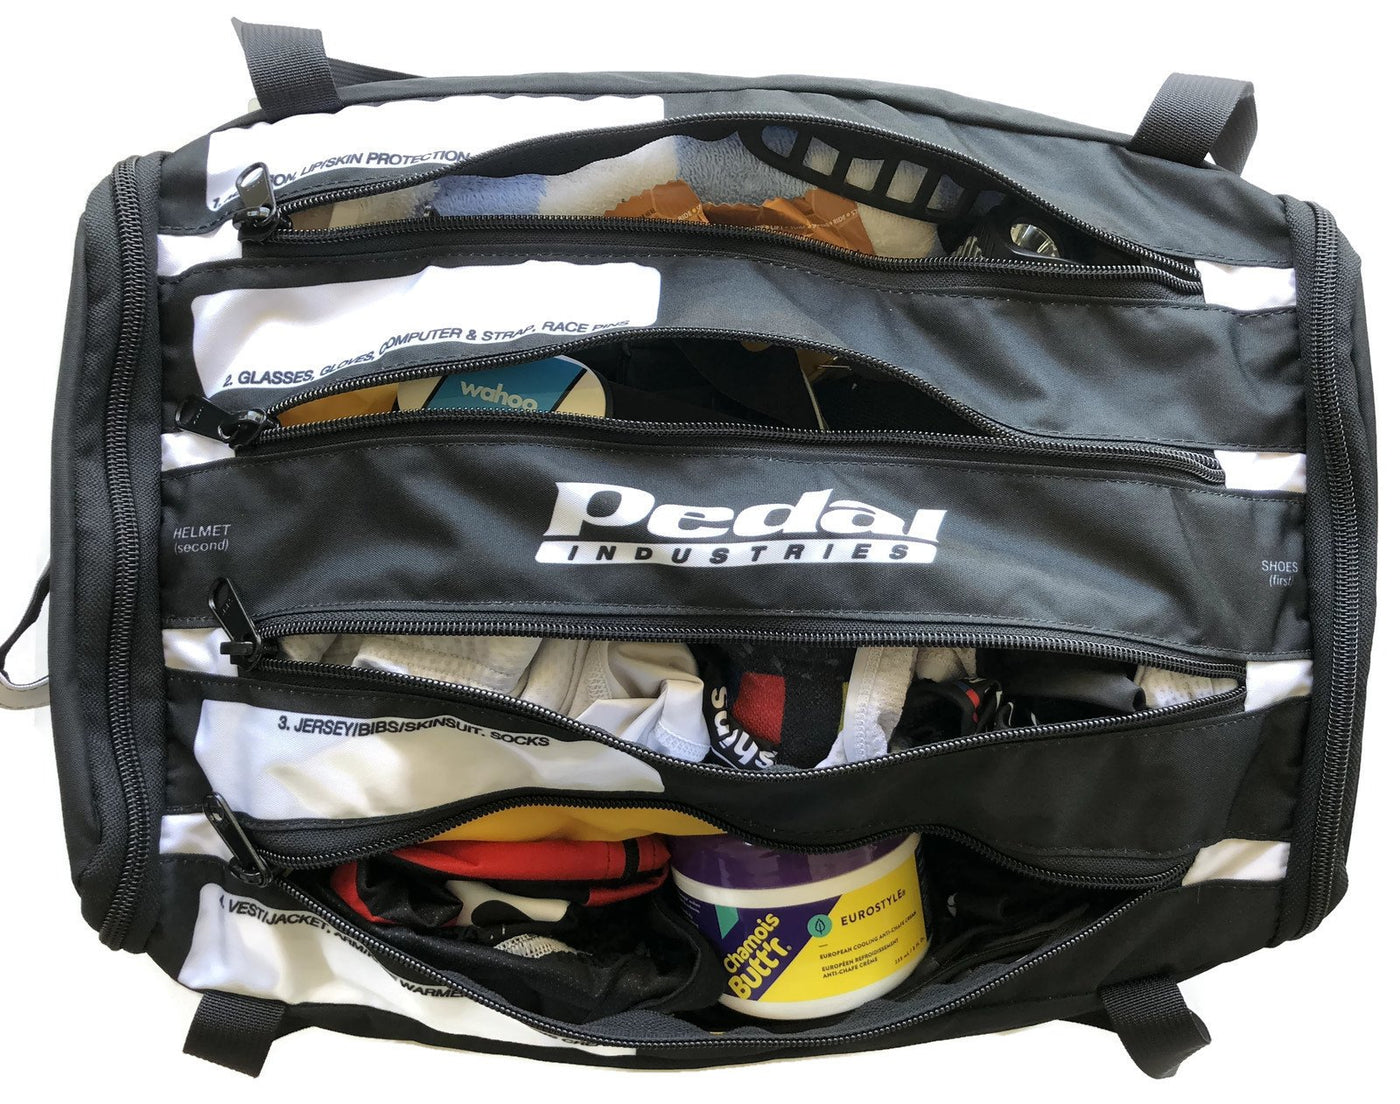 Ascent Cycling RACEDAY BAG